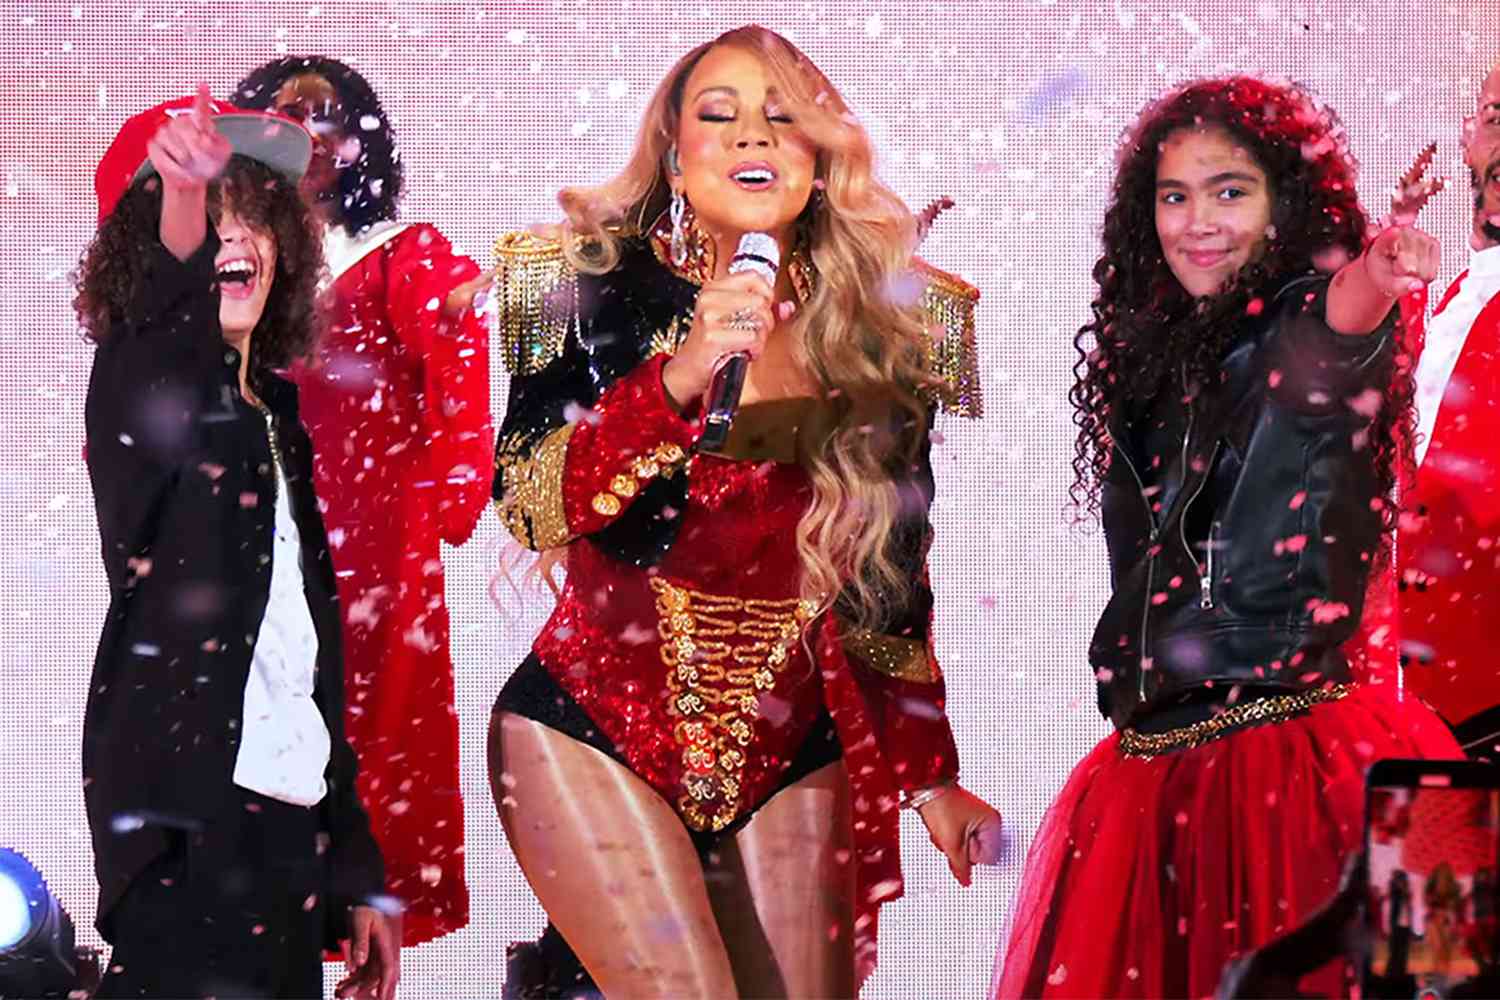 Mariah Carey Celebrates Her Lambs With New Video for ‘All I Want for Christmas Is You’